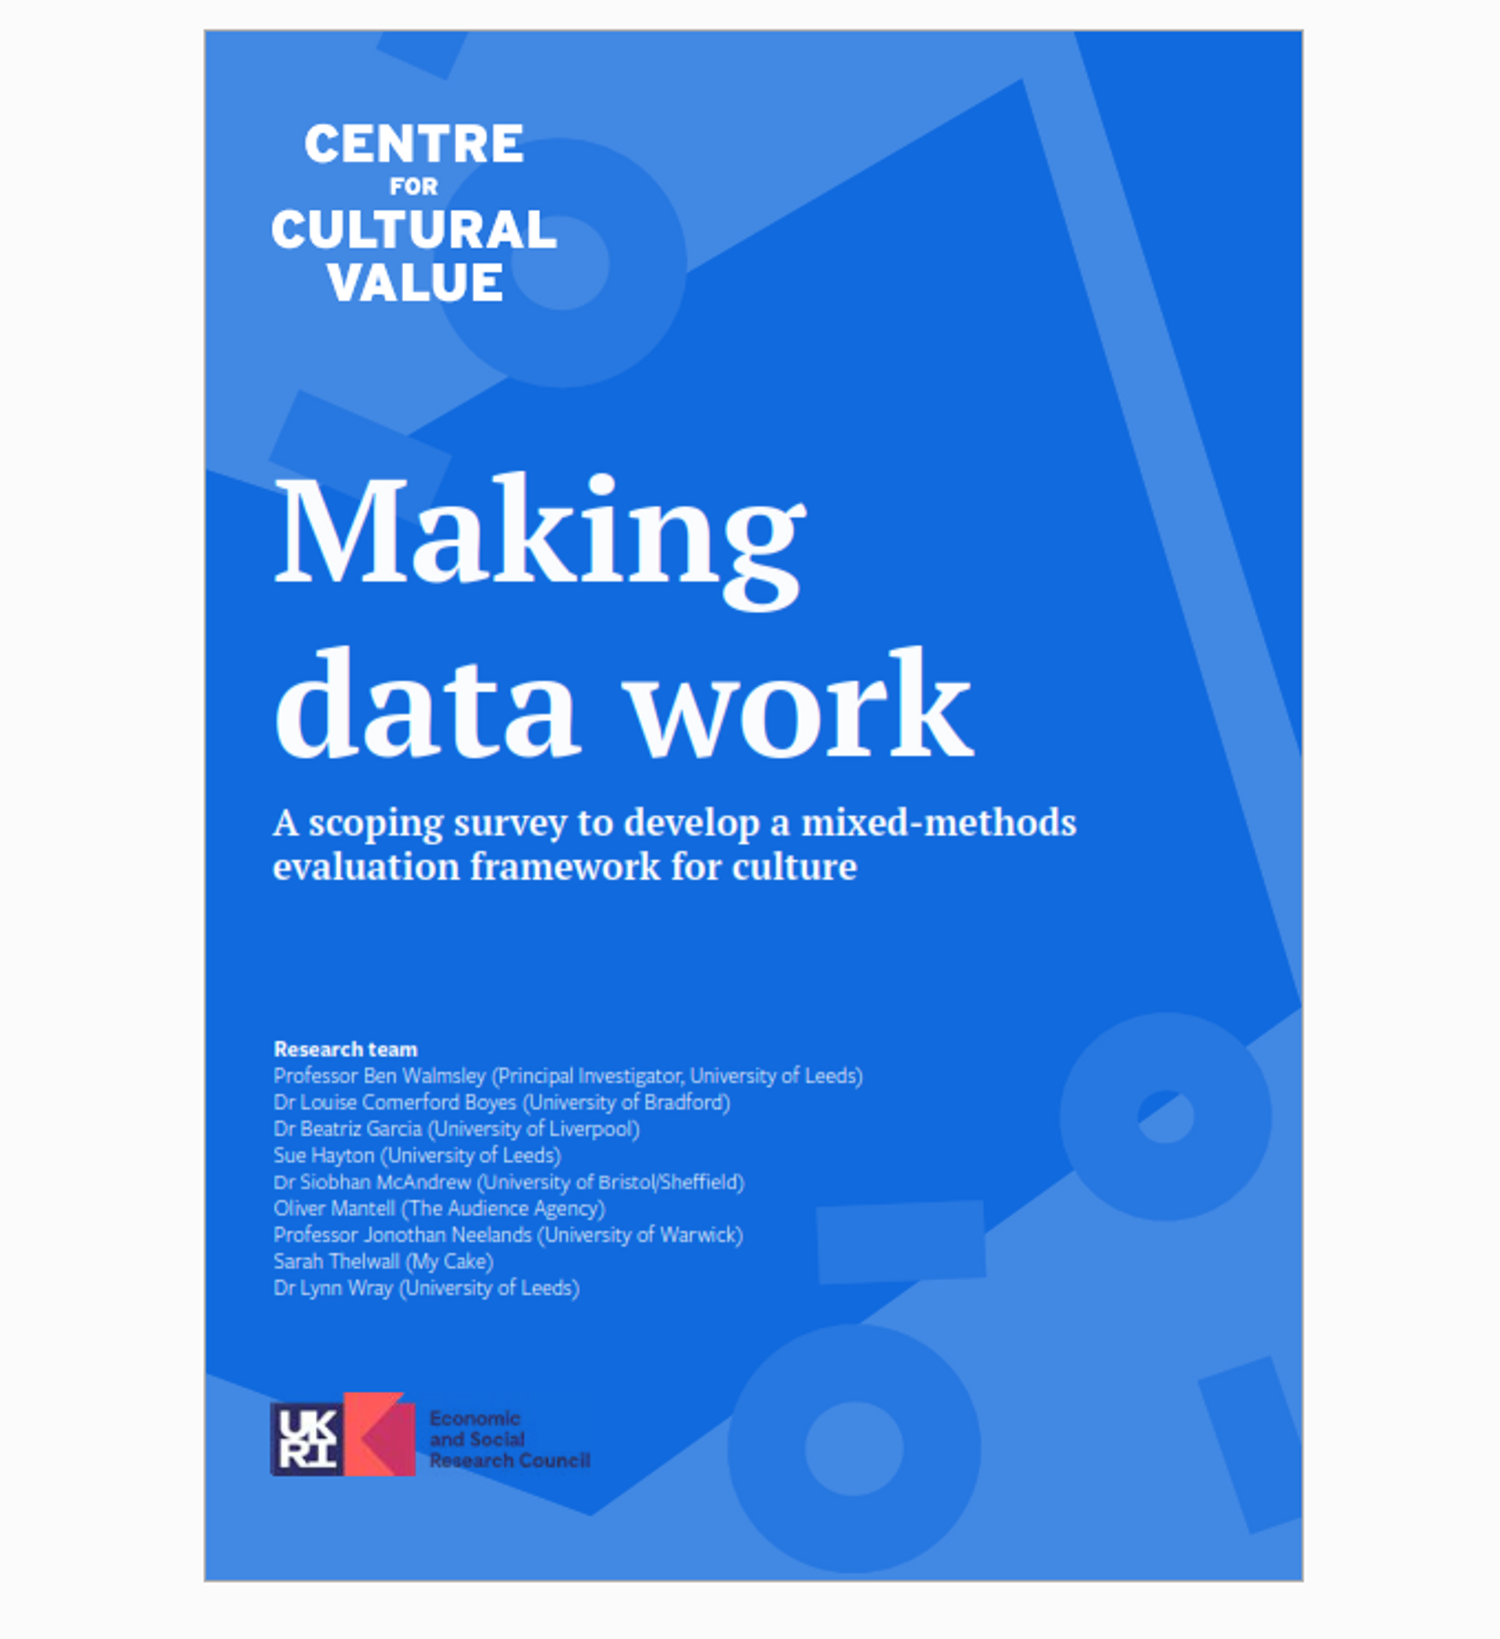 image for article: Making Data Work